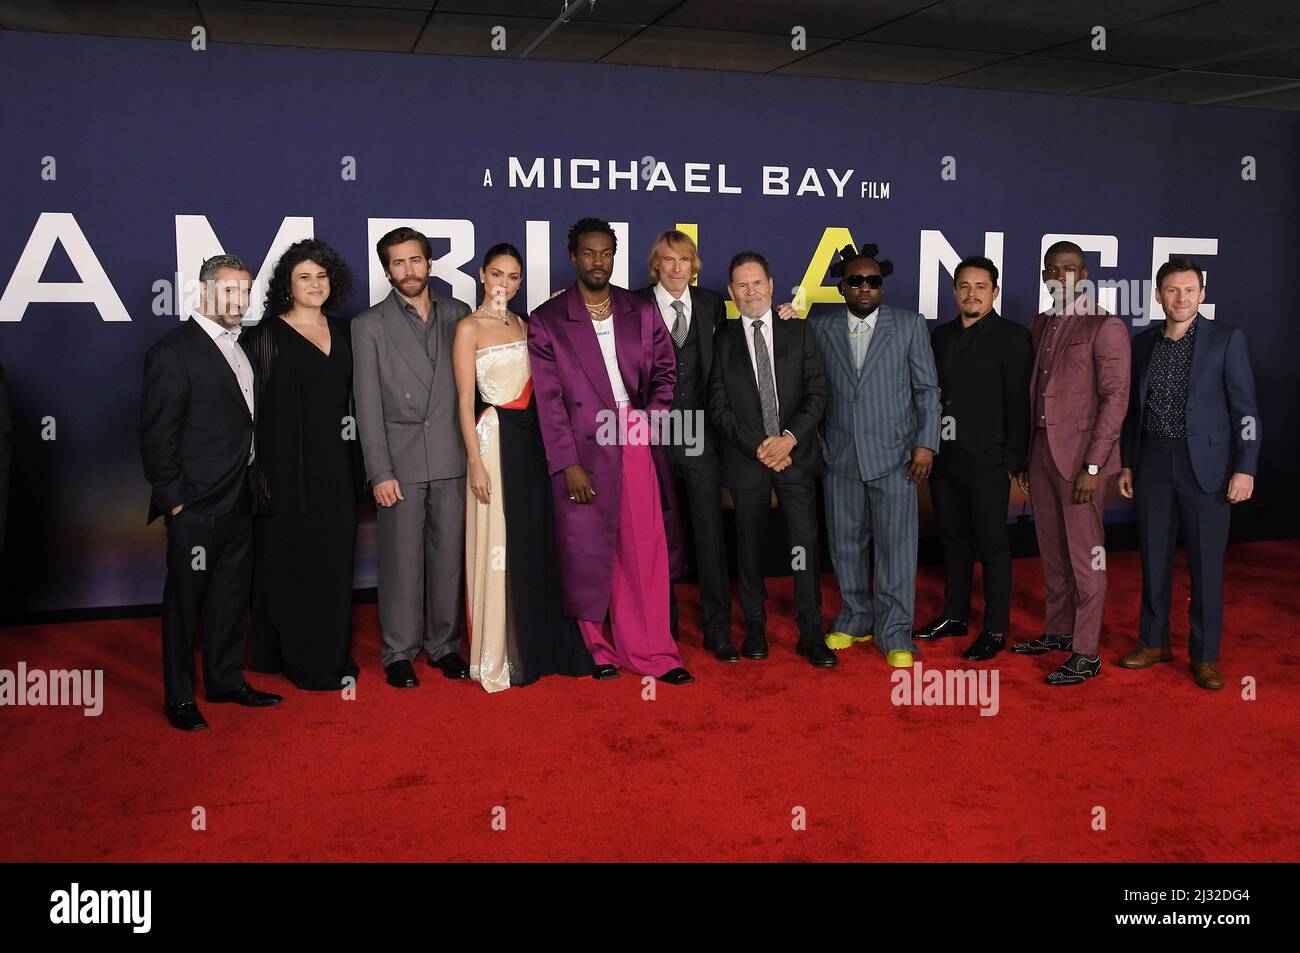 Los Angeles, USA. 04th Apr, 2022. (L-R) Brad Fischer, Olivia Stambouliah, Jake Gyllenhaal, Eiza Gonzalez, Yahya Abdul-Mateen II, Michael Bay, A Martinez, Wale Folarin, Jesse Garcia, Cedric Sanders and Keir O'Donnell at the AMBULANCE Los Angeles Premiere held at the Academy Museum of Motion Pictures in Los Angeles, CA on Monday, ?April 4, 2022. (Photo By Sthanlee B. Mirador/Sipa USA) Credit: Sipa USA/Alamy Live News Stock Photo